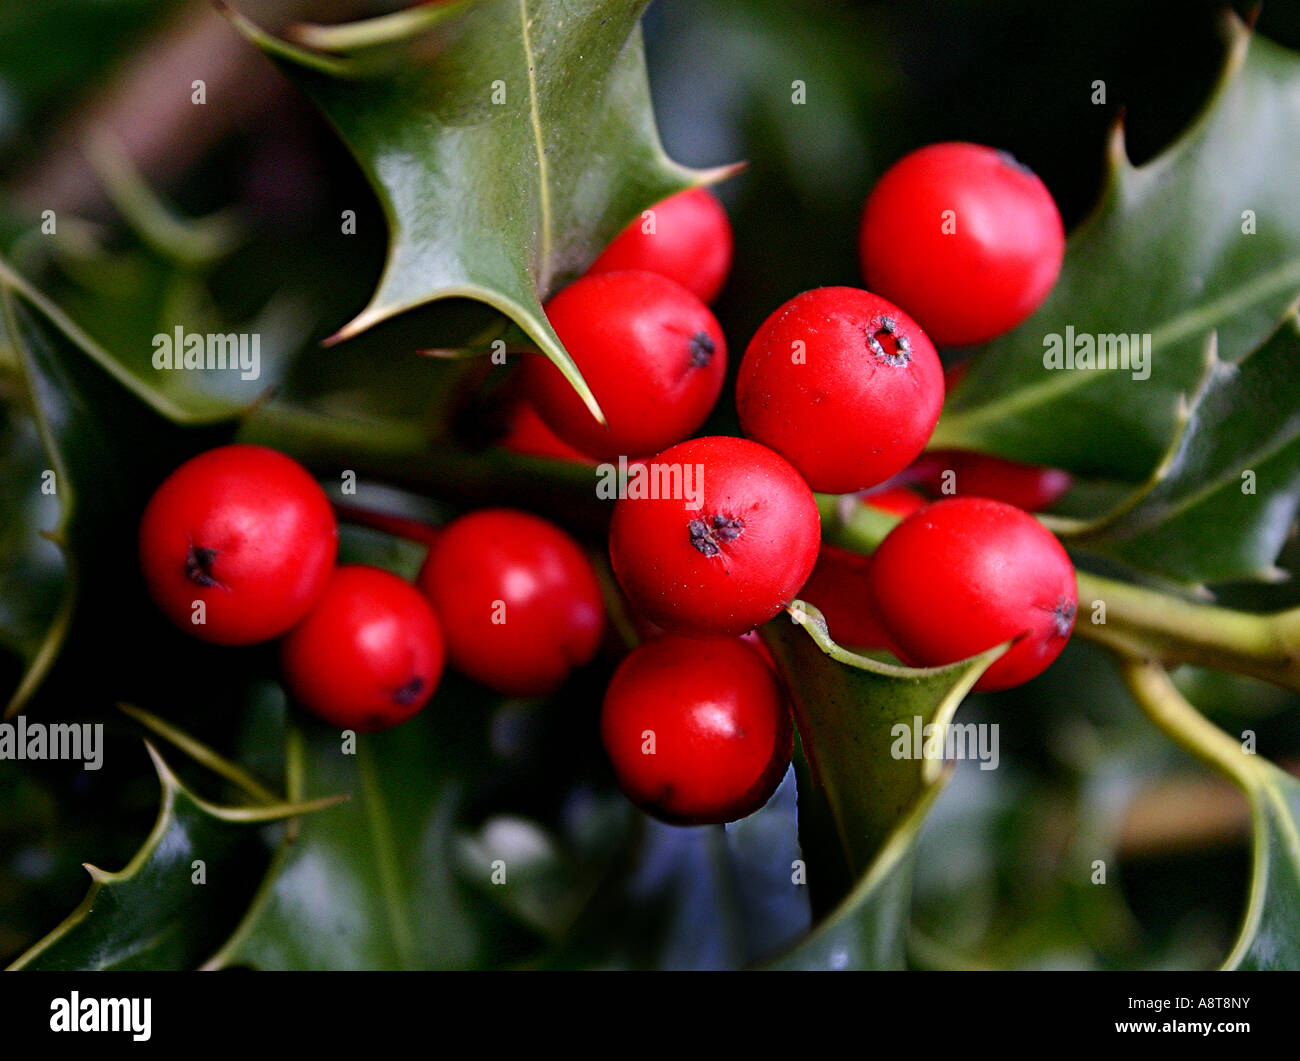 Red Christmas Holly Berries and Thorny Variegated Leaves Stock Photo